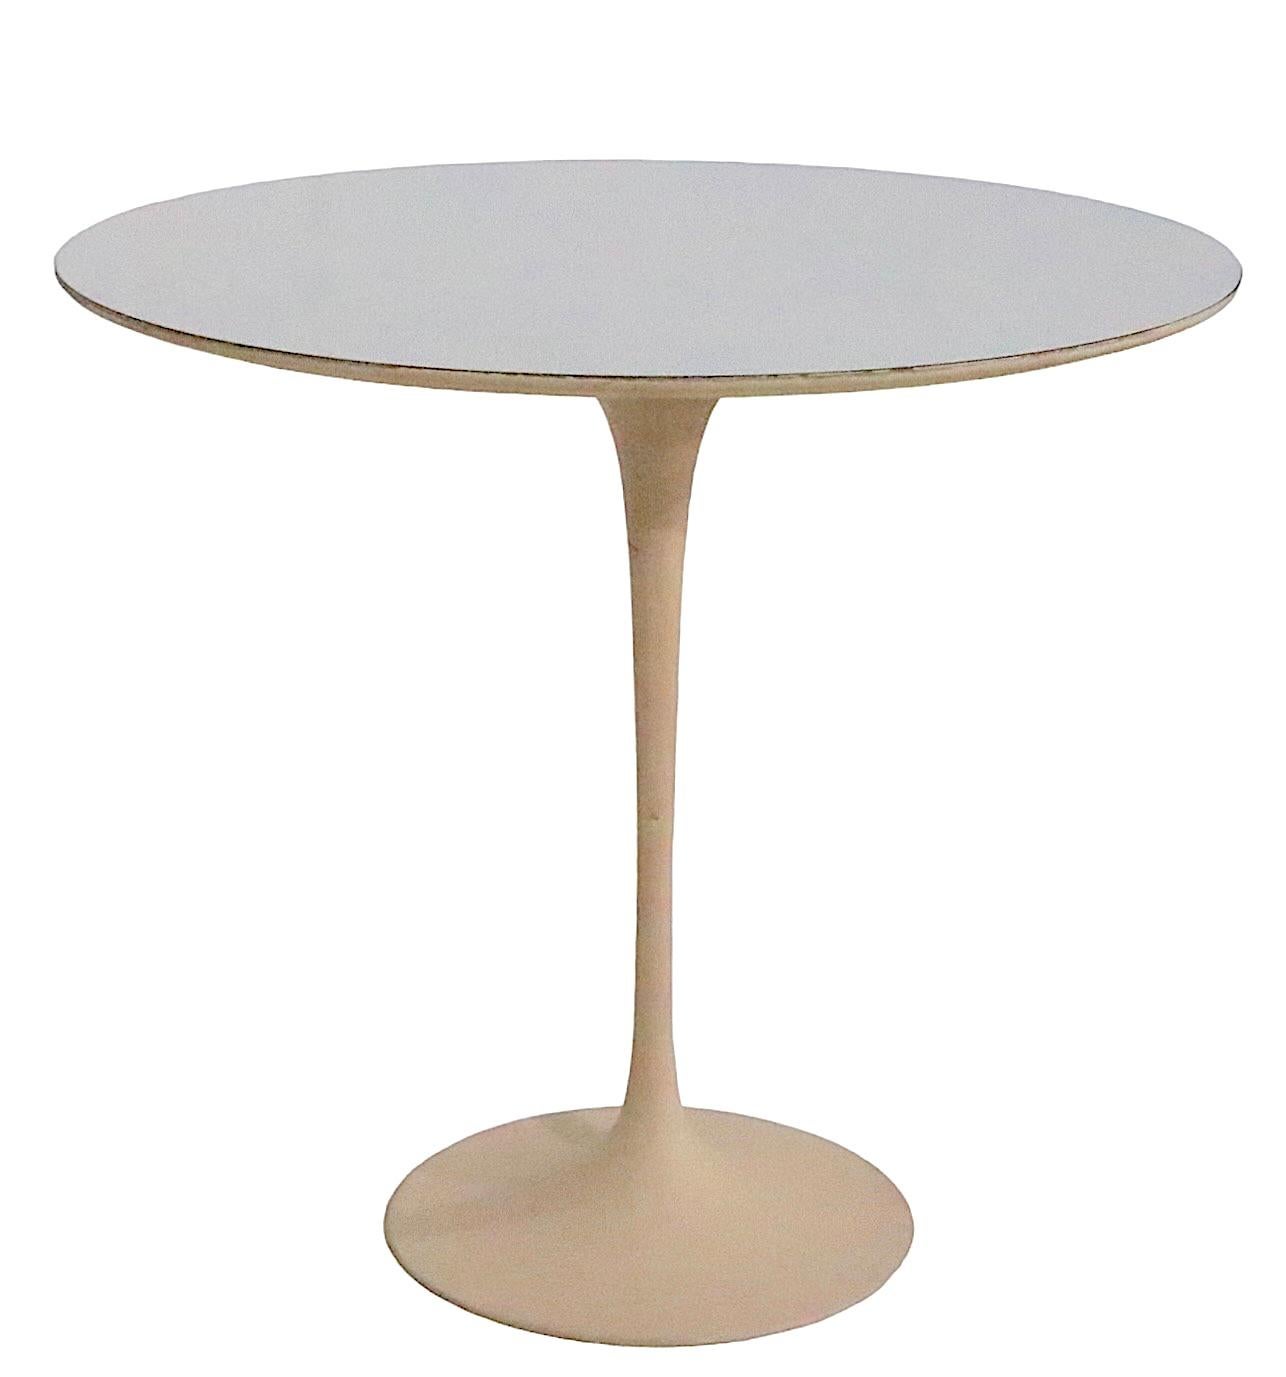 20th Century Saarinen for Knoll Tulip Side Table 320 Park Ave  c 1960's For Sale